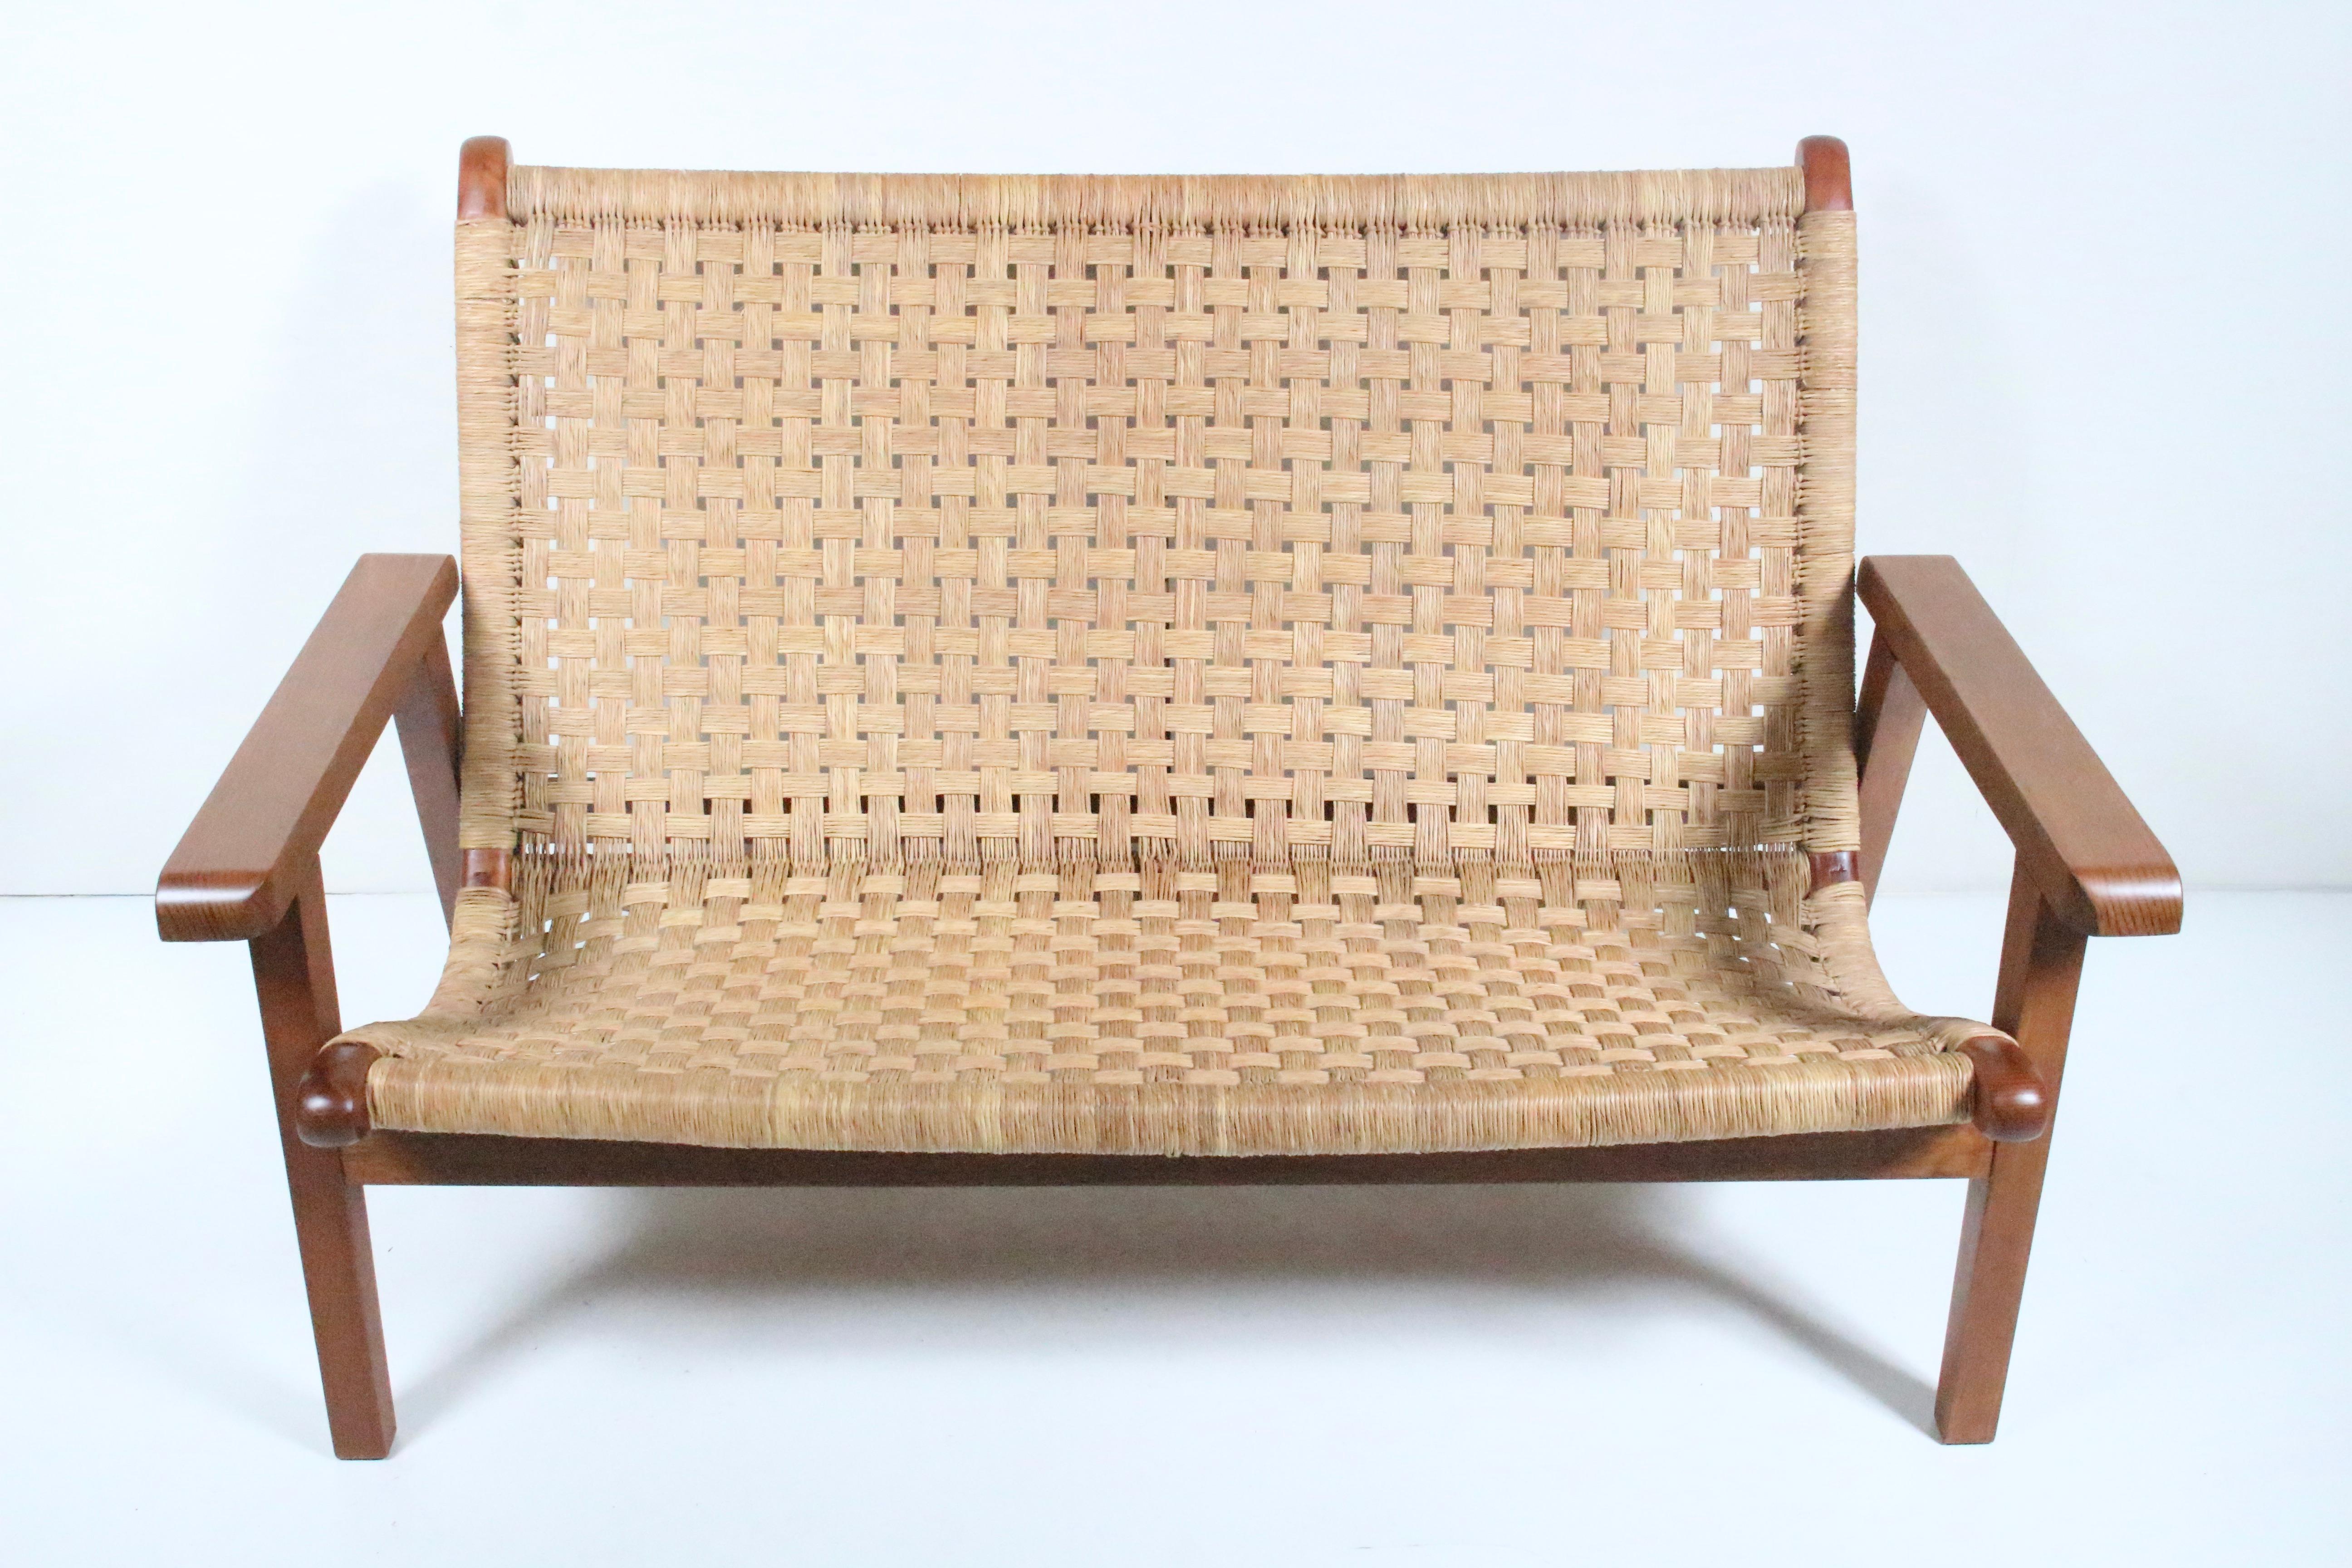 Mexican Modern Michael van Beuren teak and woven raffia lounge settee. Featuring a sturdy, functional, with comfortable two piece Teak framework, two pegs to hold the seat in place, and Raffia wrapped rounded back and seat strung in a soft